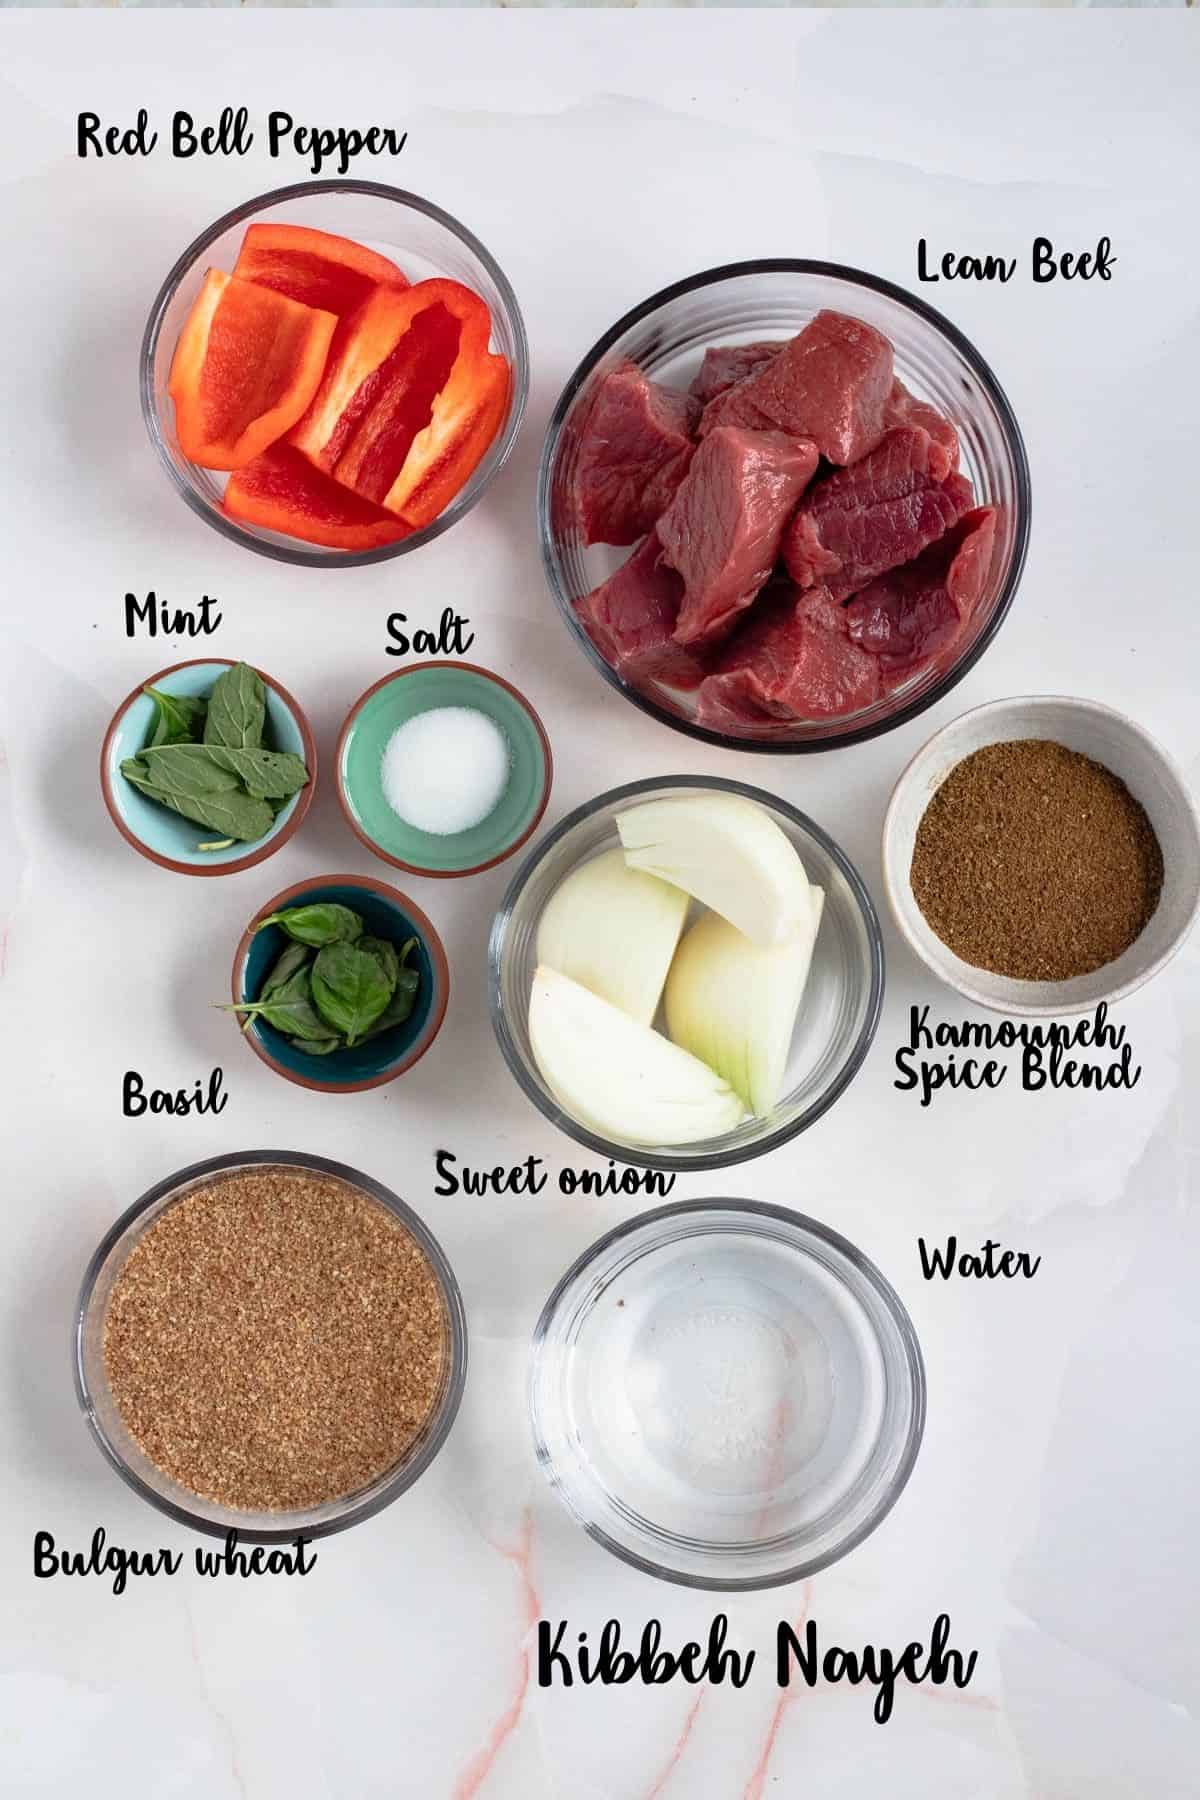 Ingredients shown are used to prepare Kibbeh Nayeh.